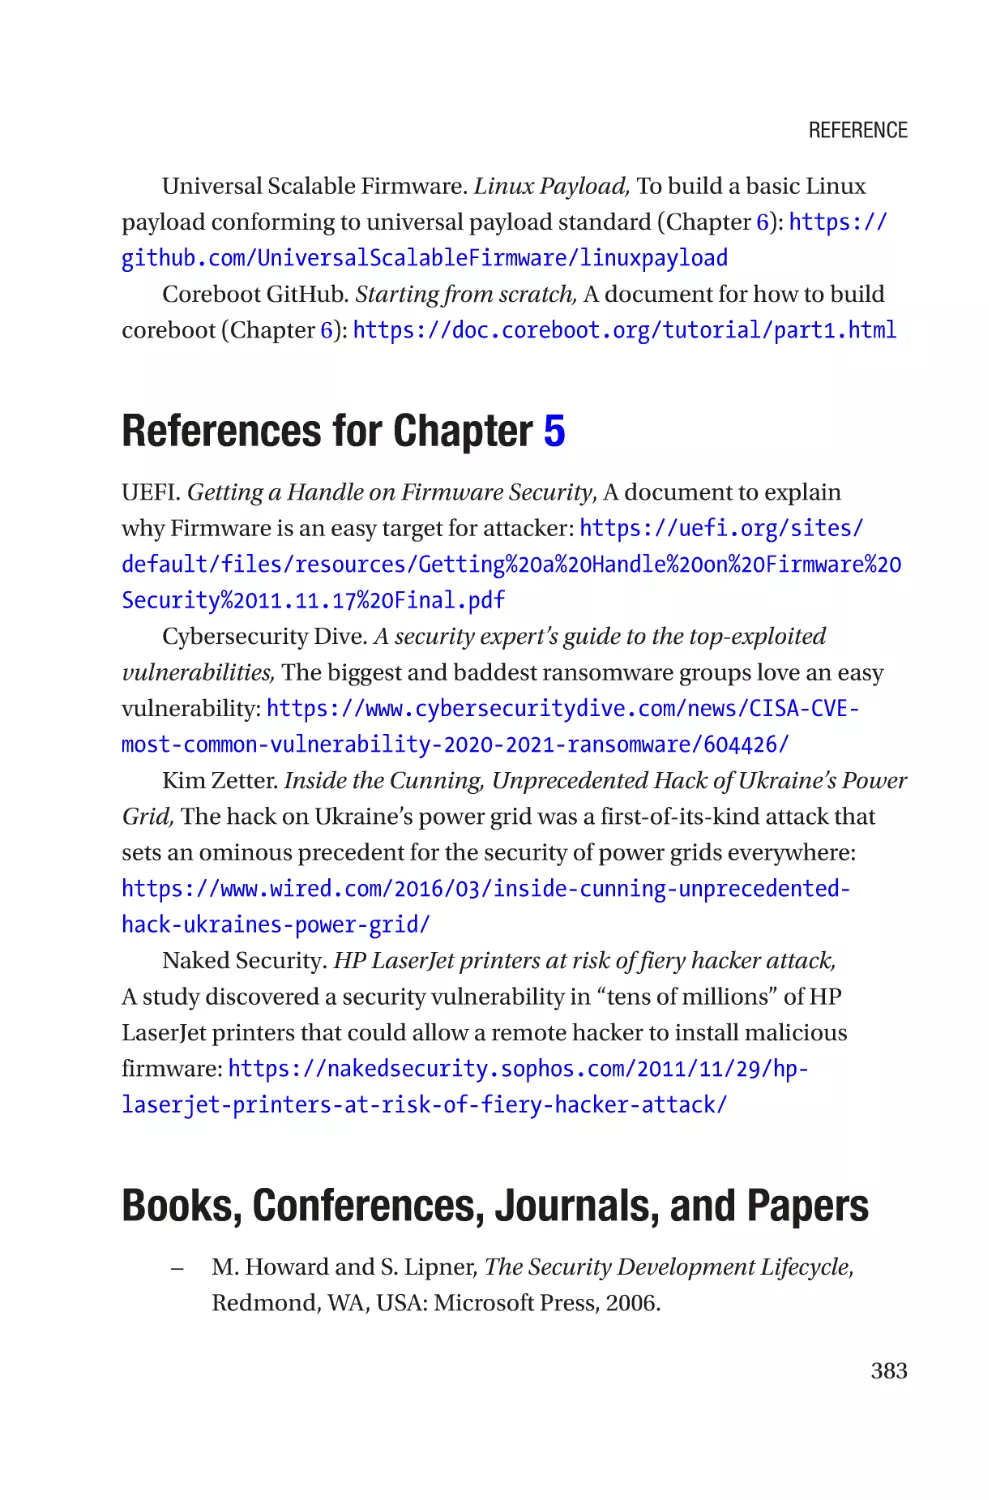 References for Chapter 5
Books, Conferences, Journals, and Papers